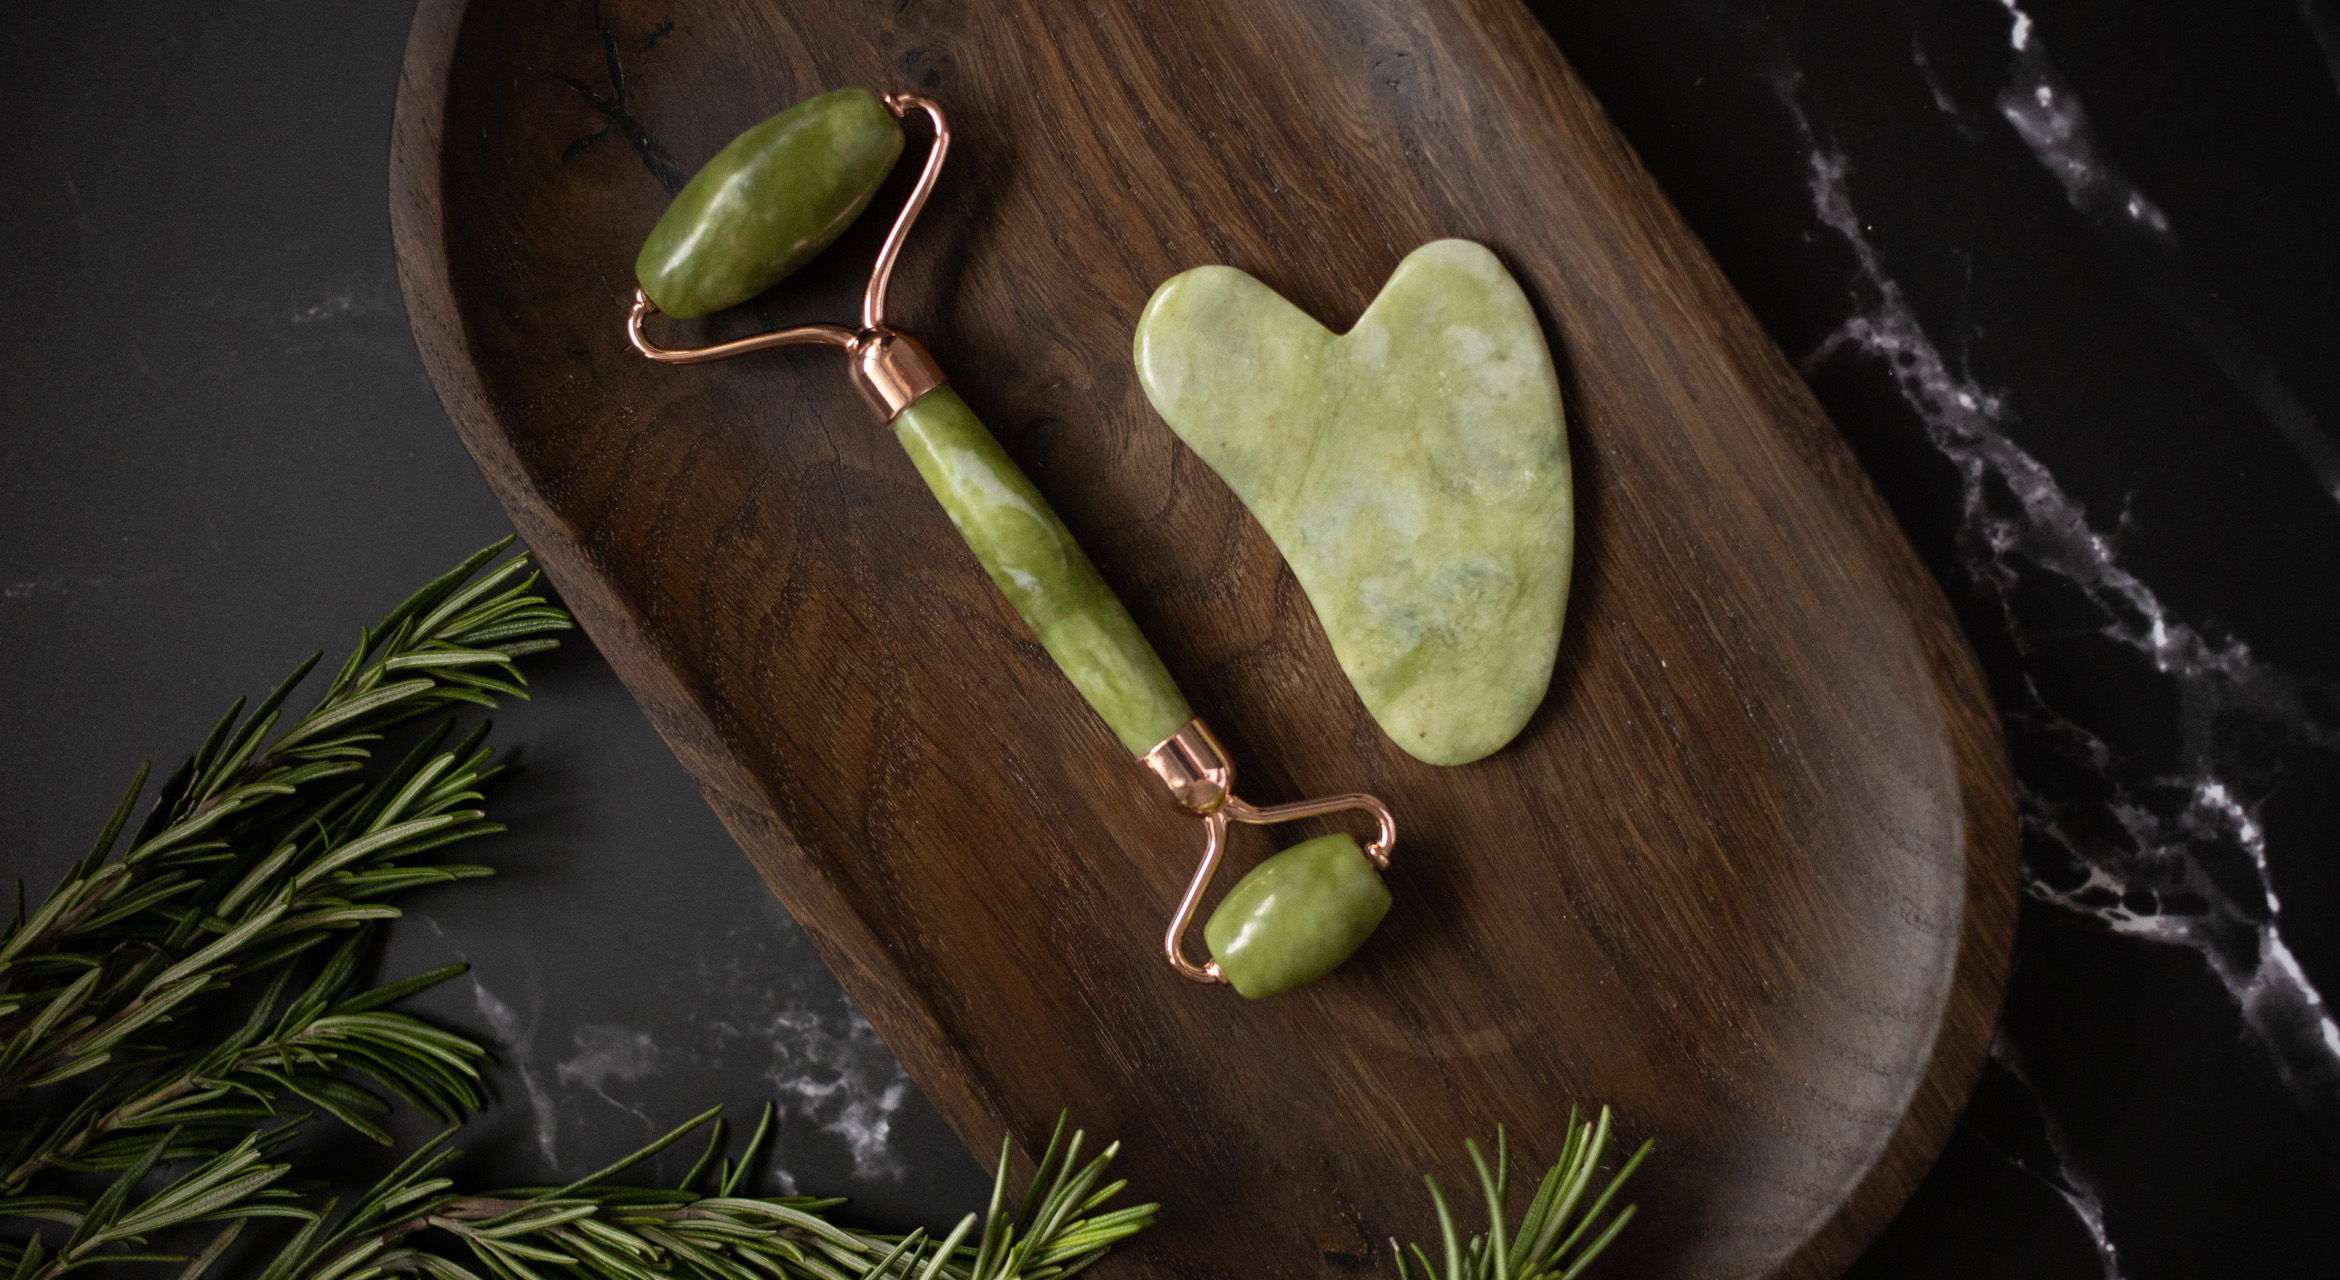 Image displaying a hand holding a gua sha stone, showcasing its use in skincare routines and wellness practices.